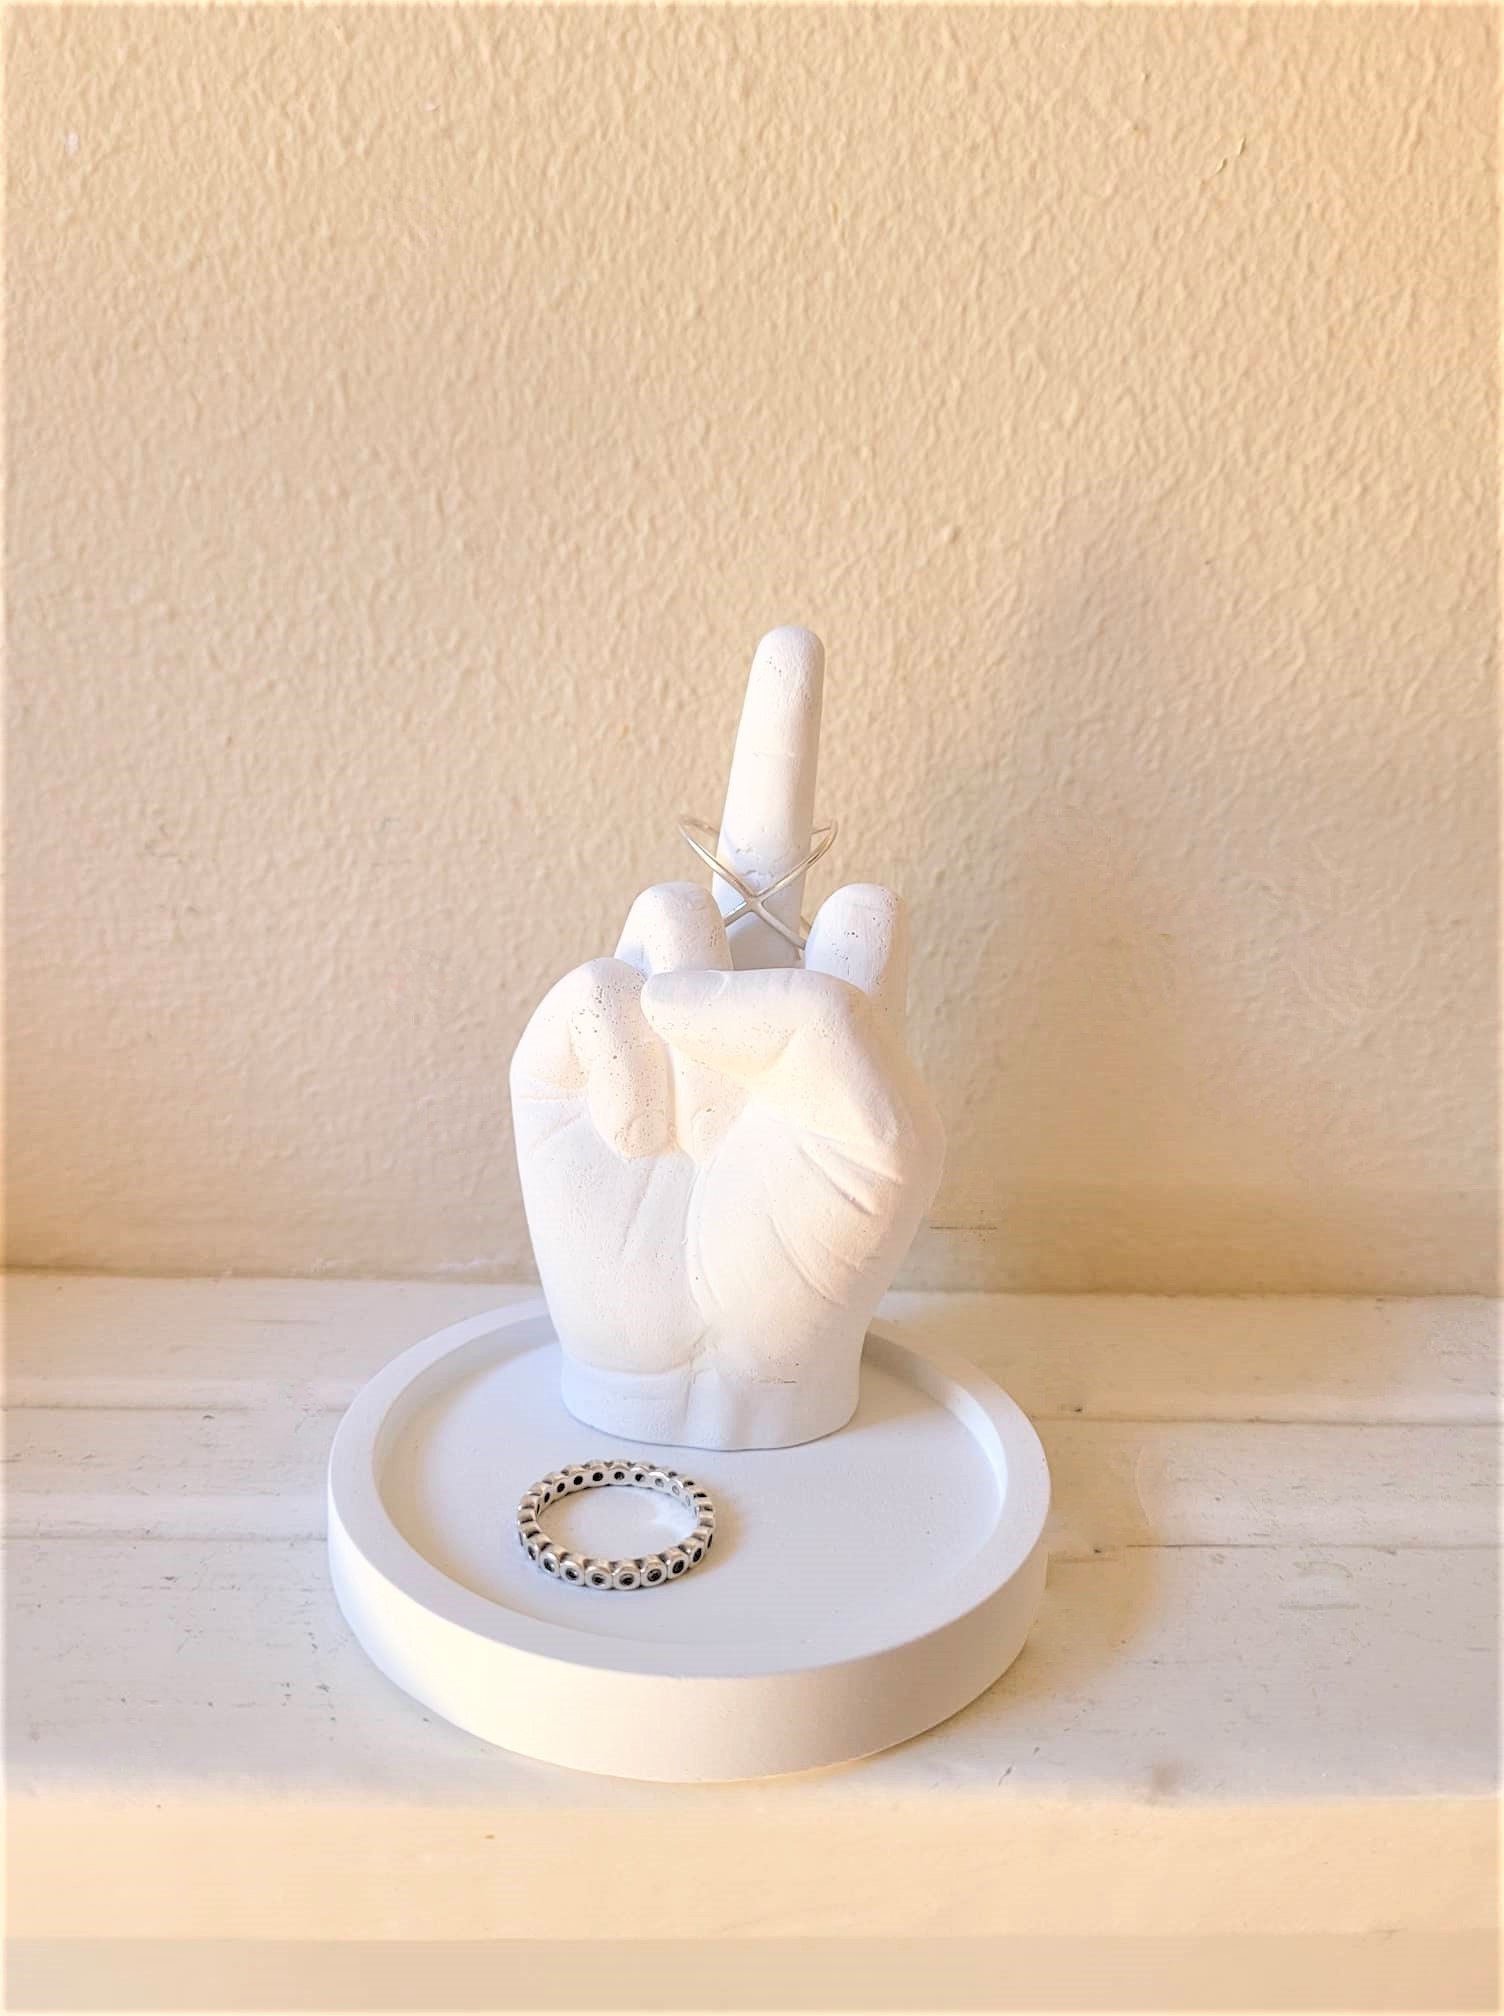  Stephanie Imports White Ceramic Middle Finger Jewelry Ring Dish  Tray : Clothing, Shoes & Jewelry